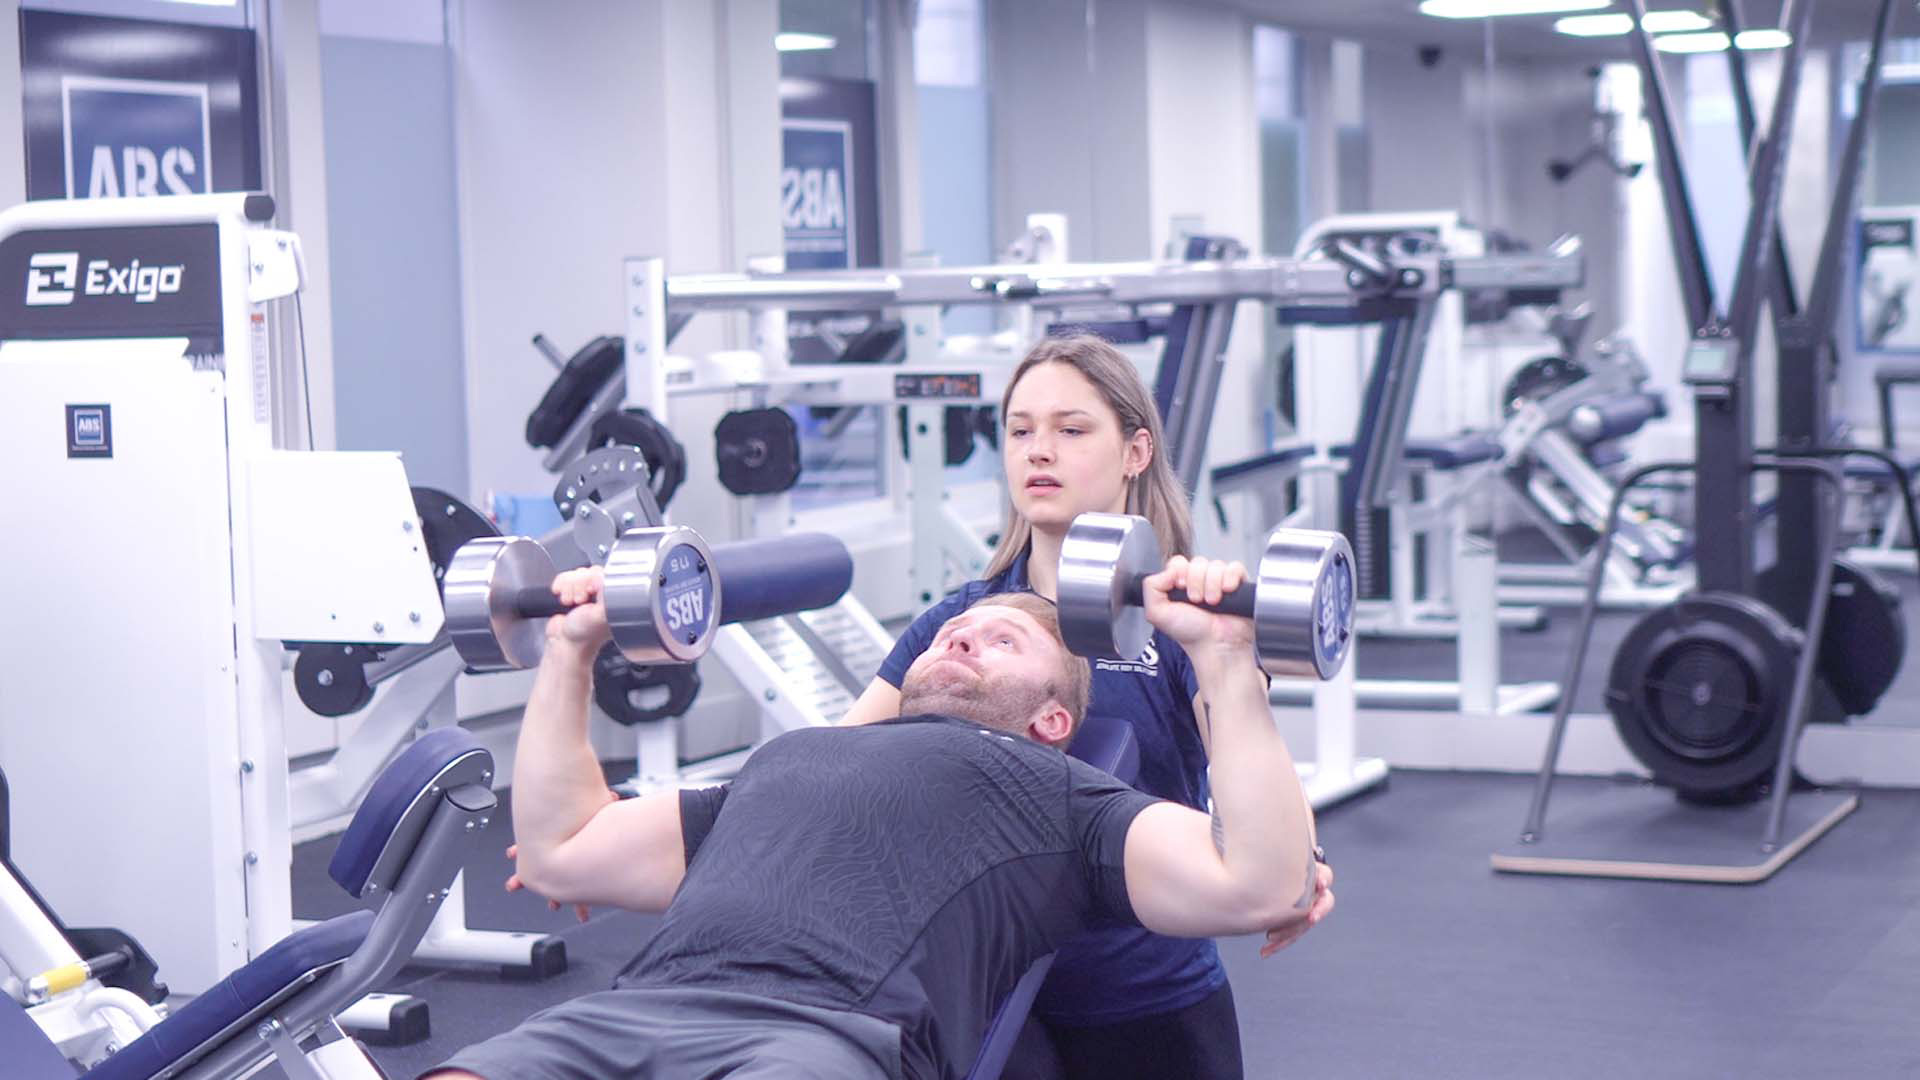 london gym personal training session at ABS